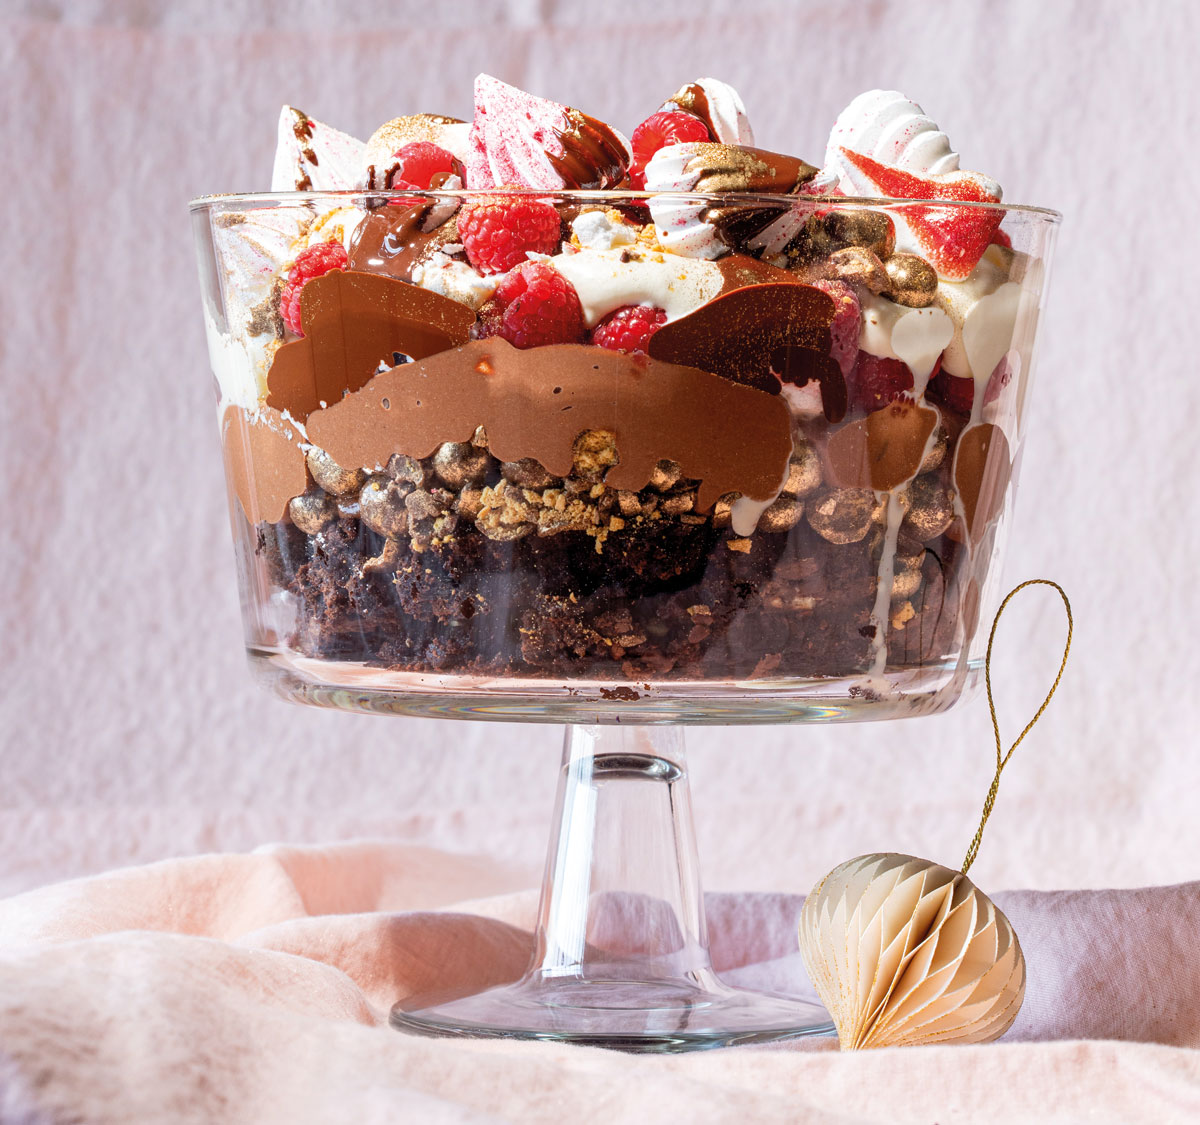 50 Easy Trifle Recipes to Serve Your Guests